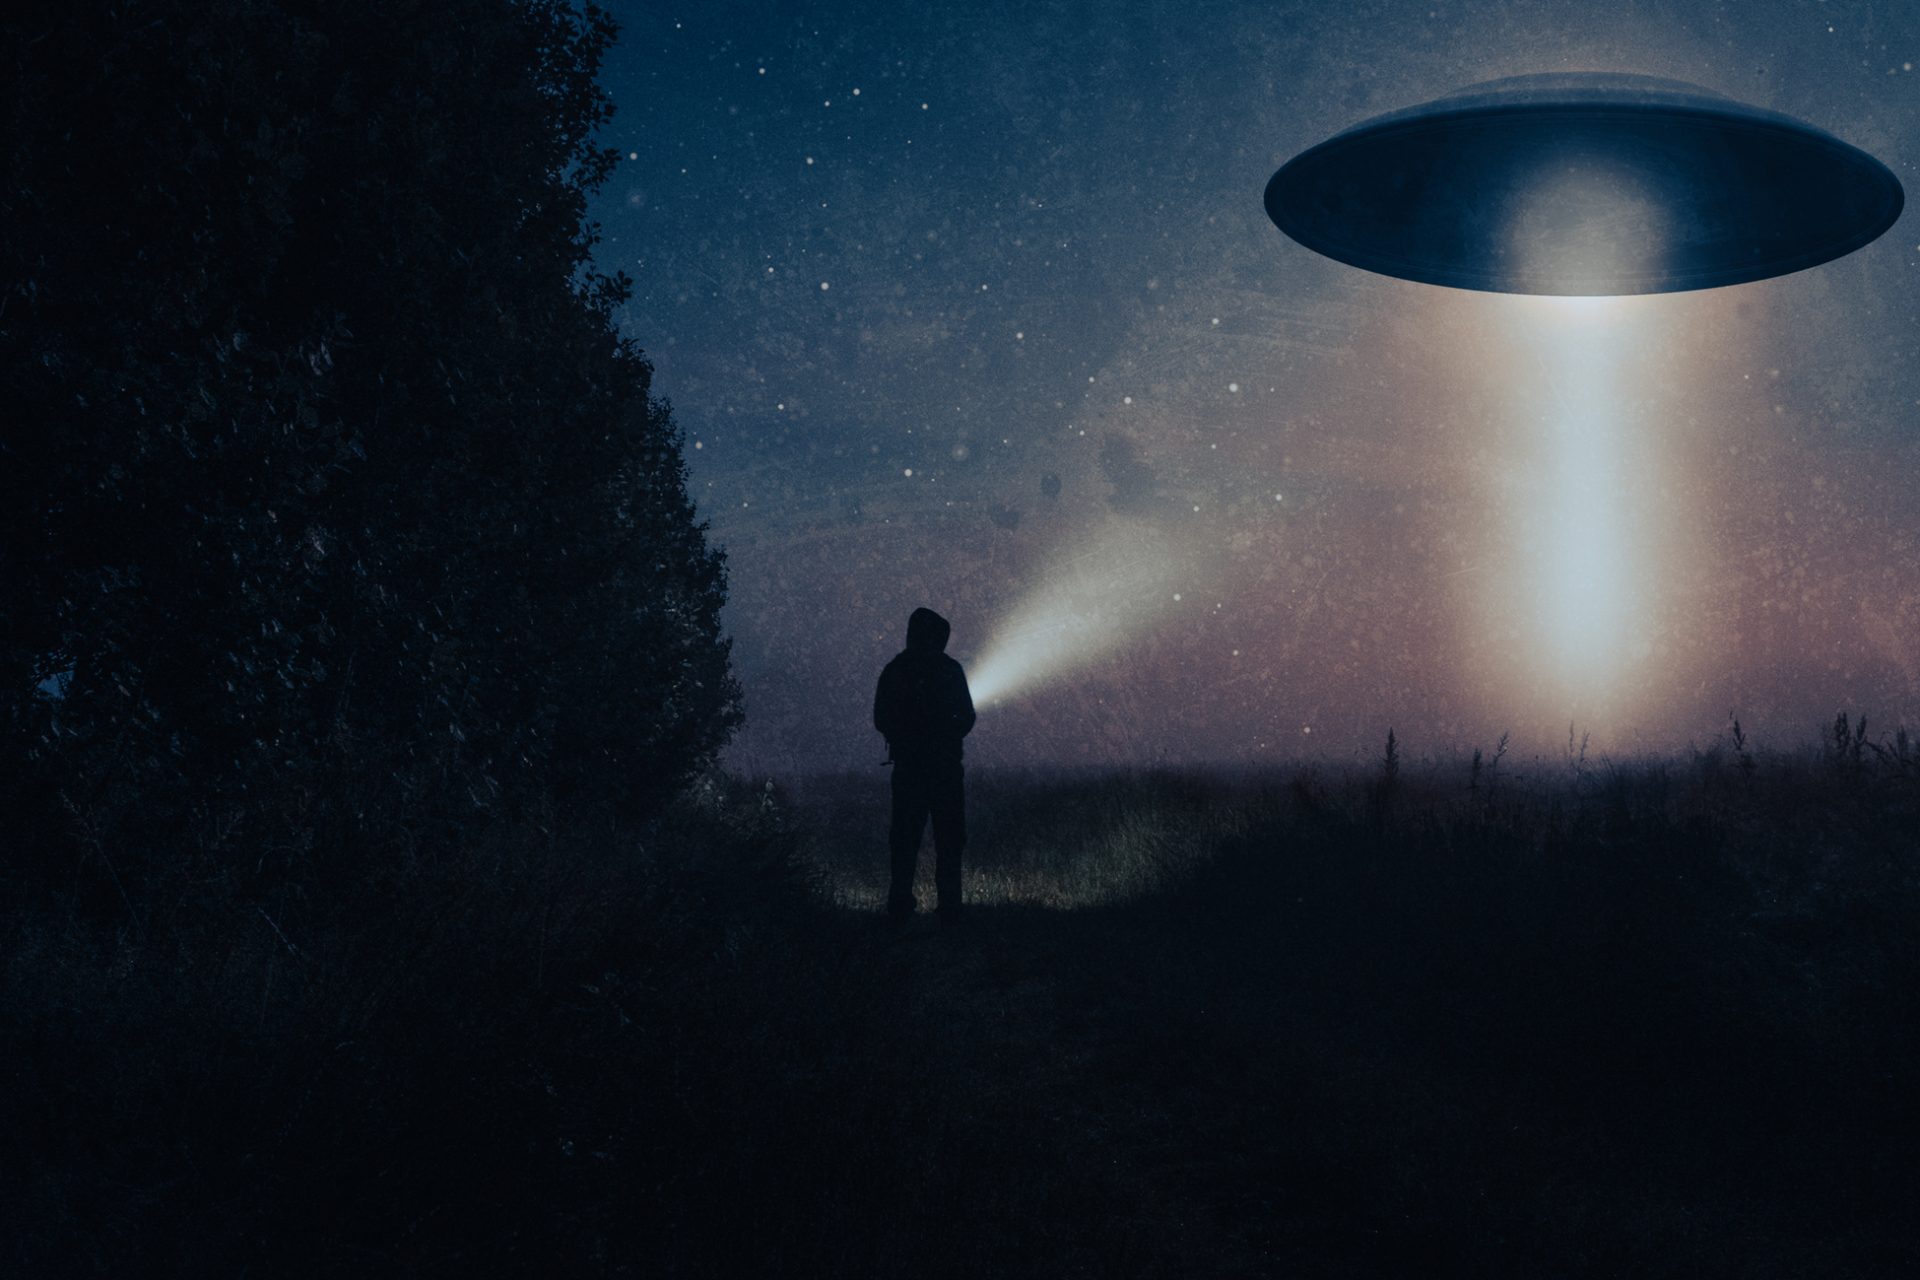 Is humanity prepared for a hypothetical alien invasion?